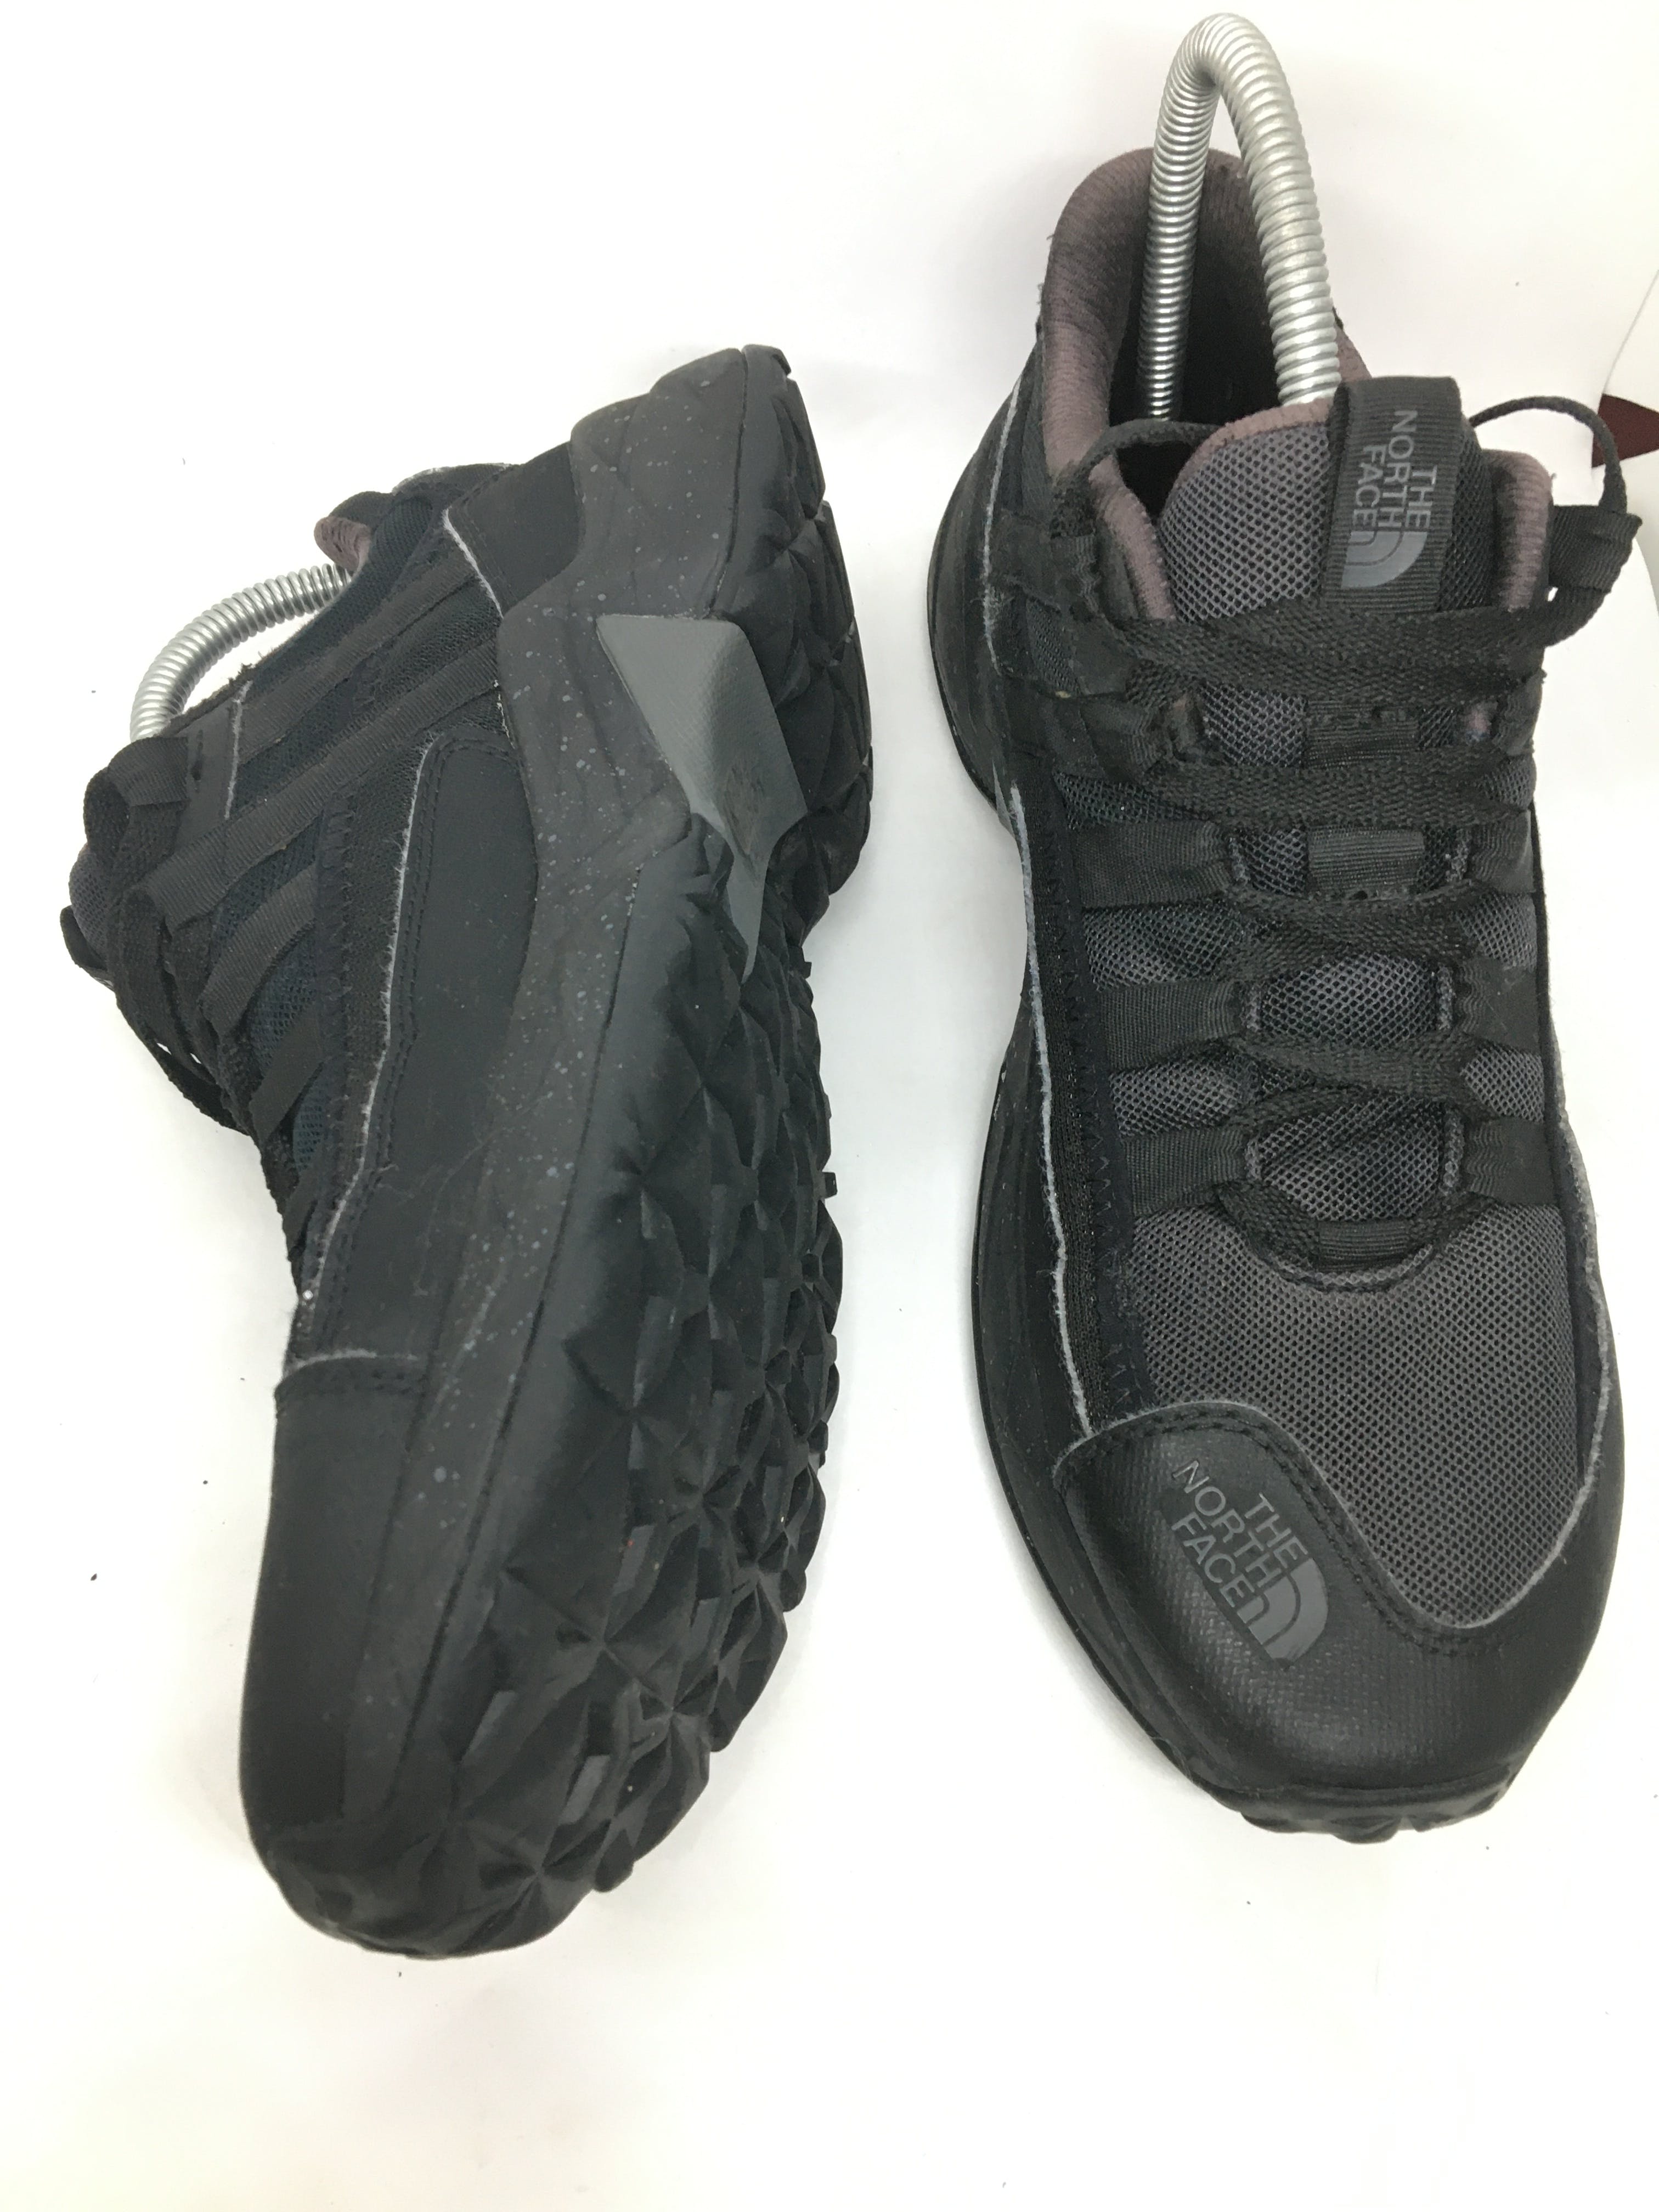 TNF The north face black sneakers size us9 - 1